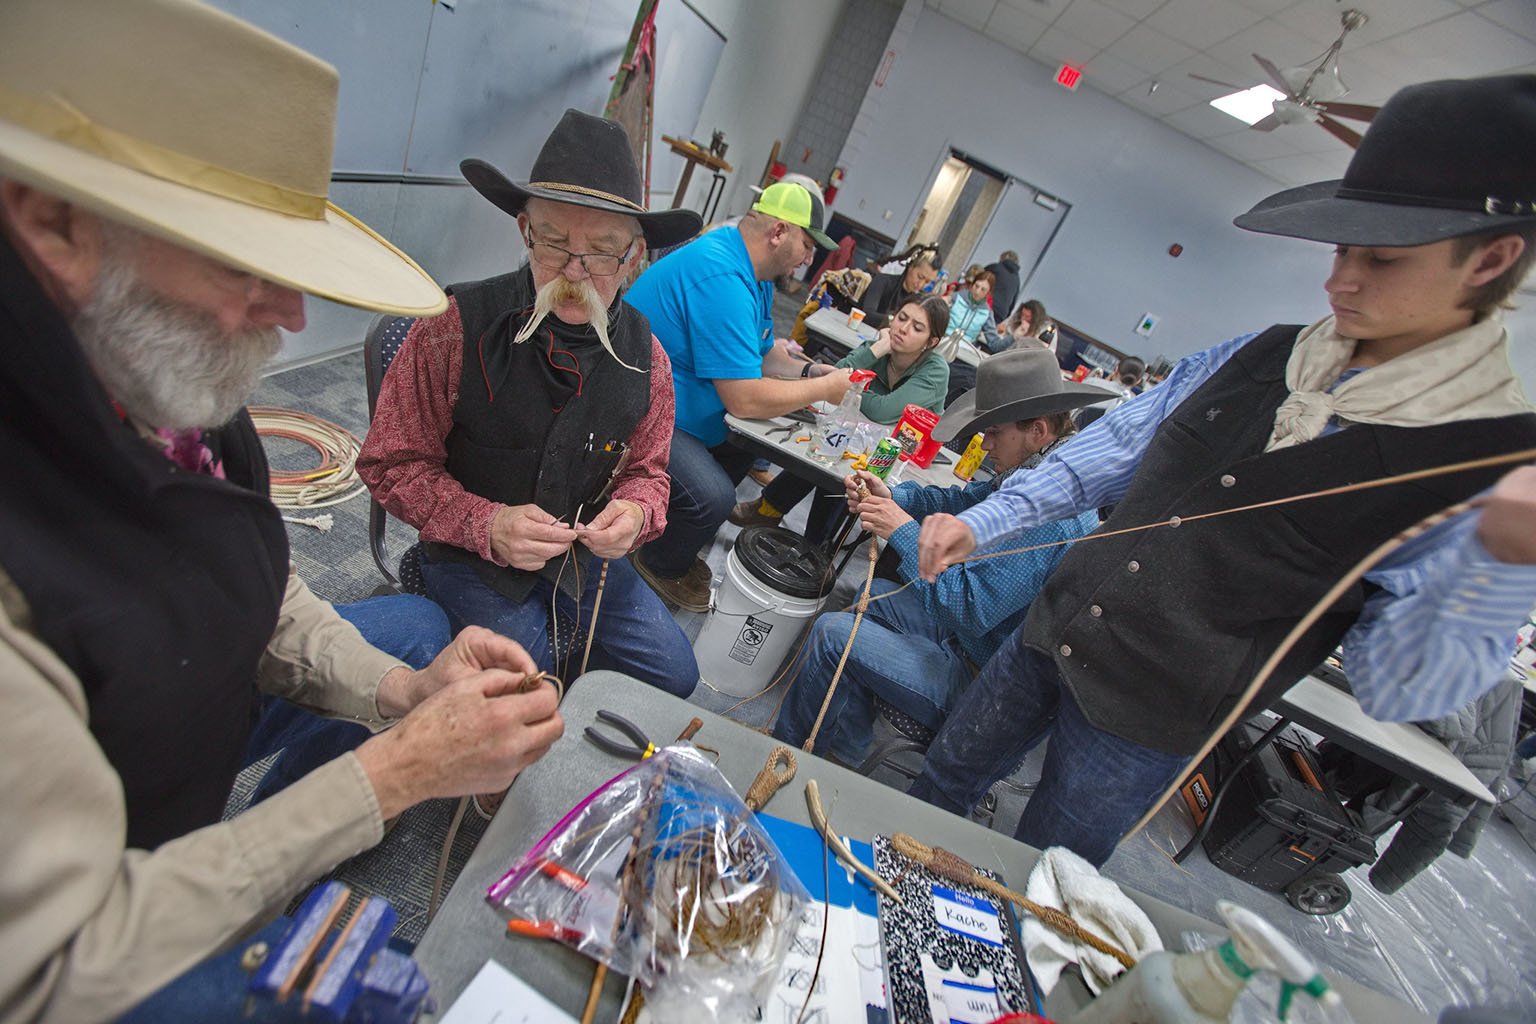 Rawhide braiders come together to share tips. Photo by Charlie Ekburg